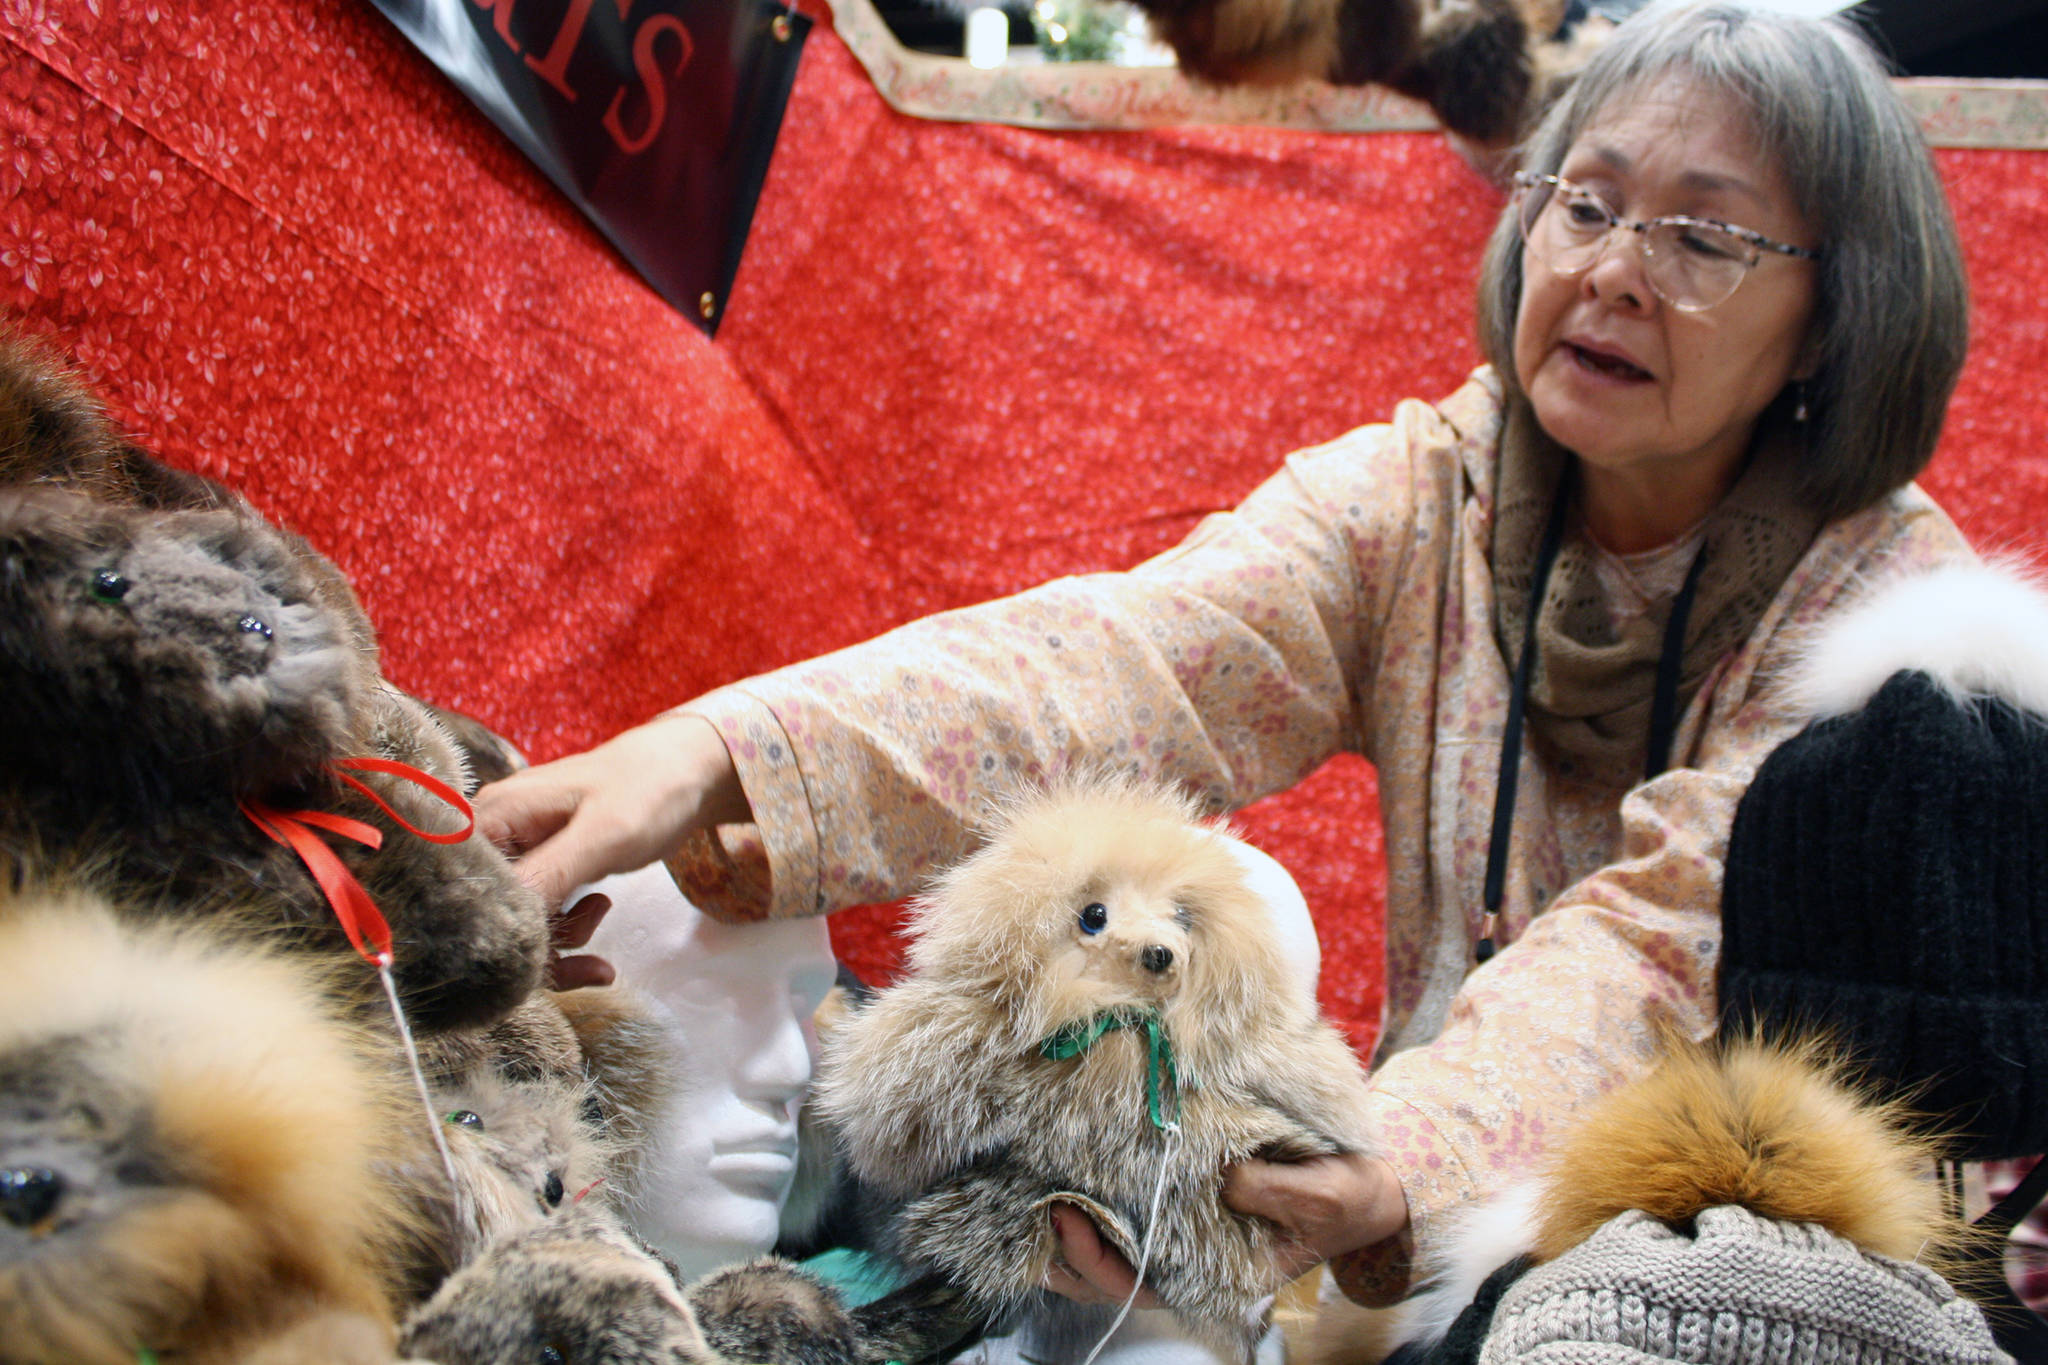 Annie Fritze of Dillingham moves stuffed animals made of fur at Juneau Public Market, Friday Nov. 30, 2019. The handmade creatures were created using a variety of furs, including otter and lynx. (Ben Hohenstatt | Juneau Empire)